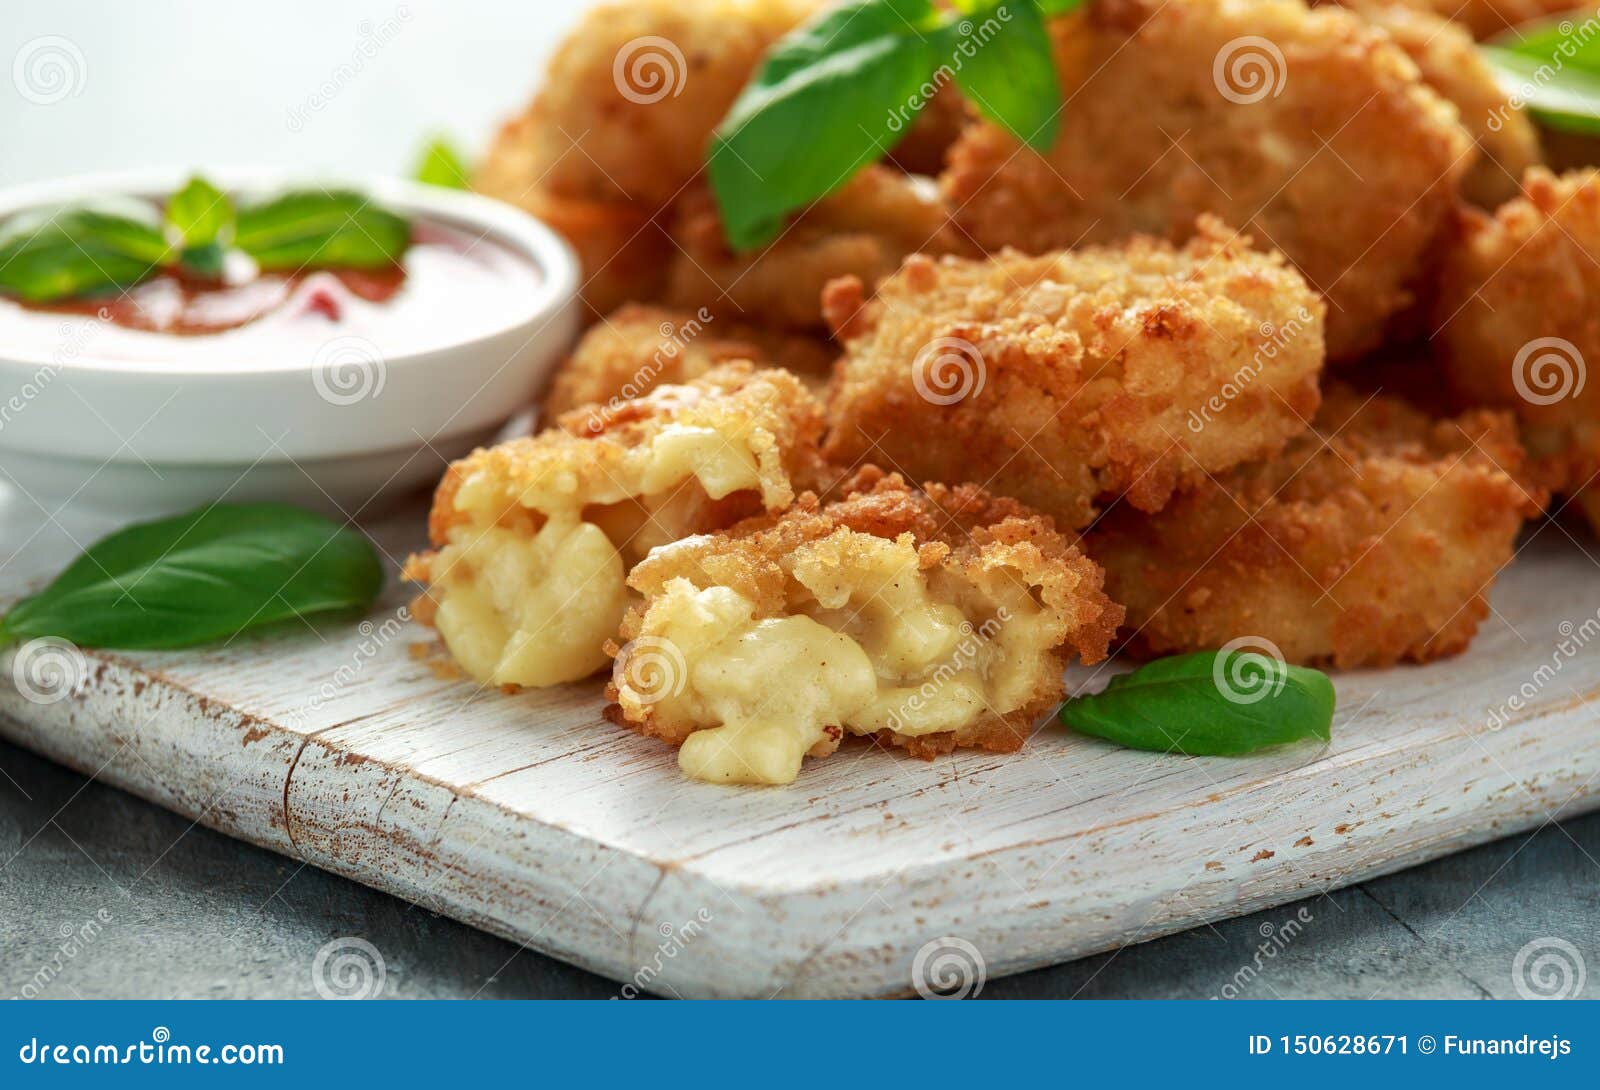 fried mac, macaroni and cheese bites in breadcrumbs with ketchup sauce on white wooden board